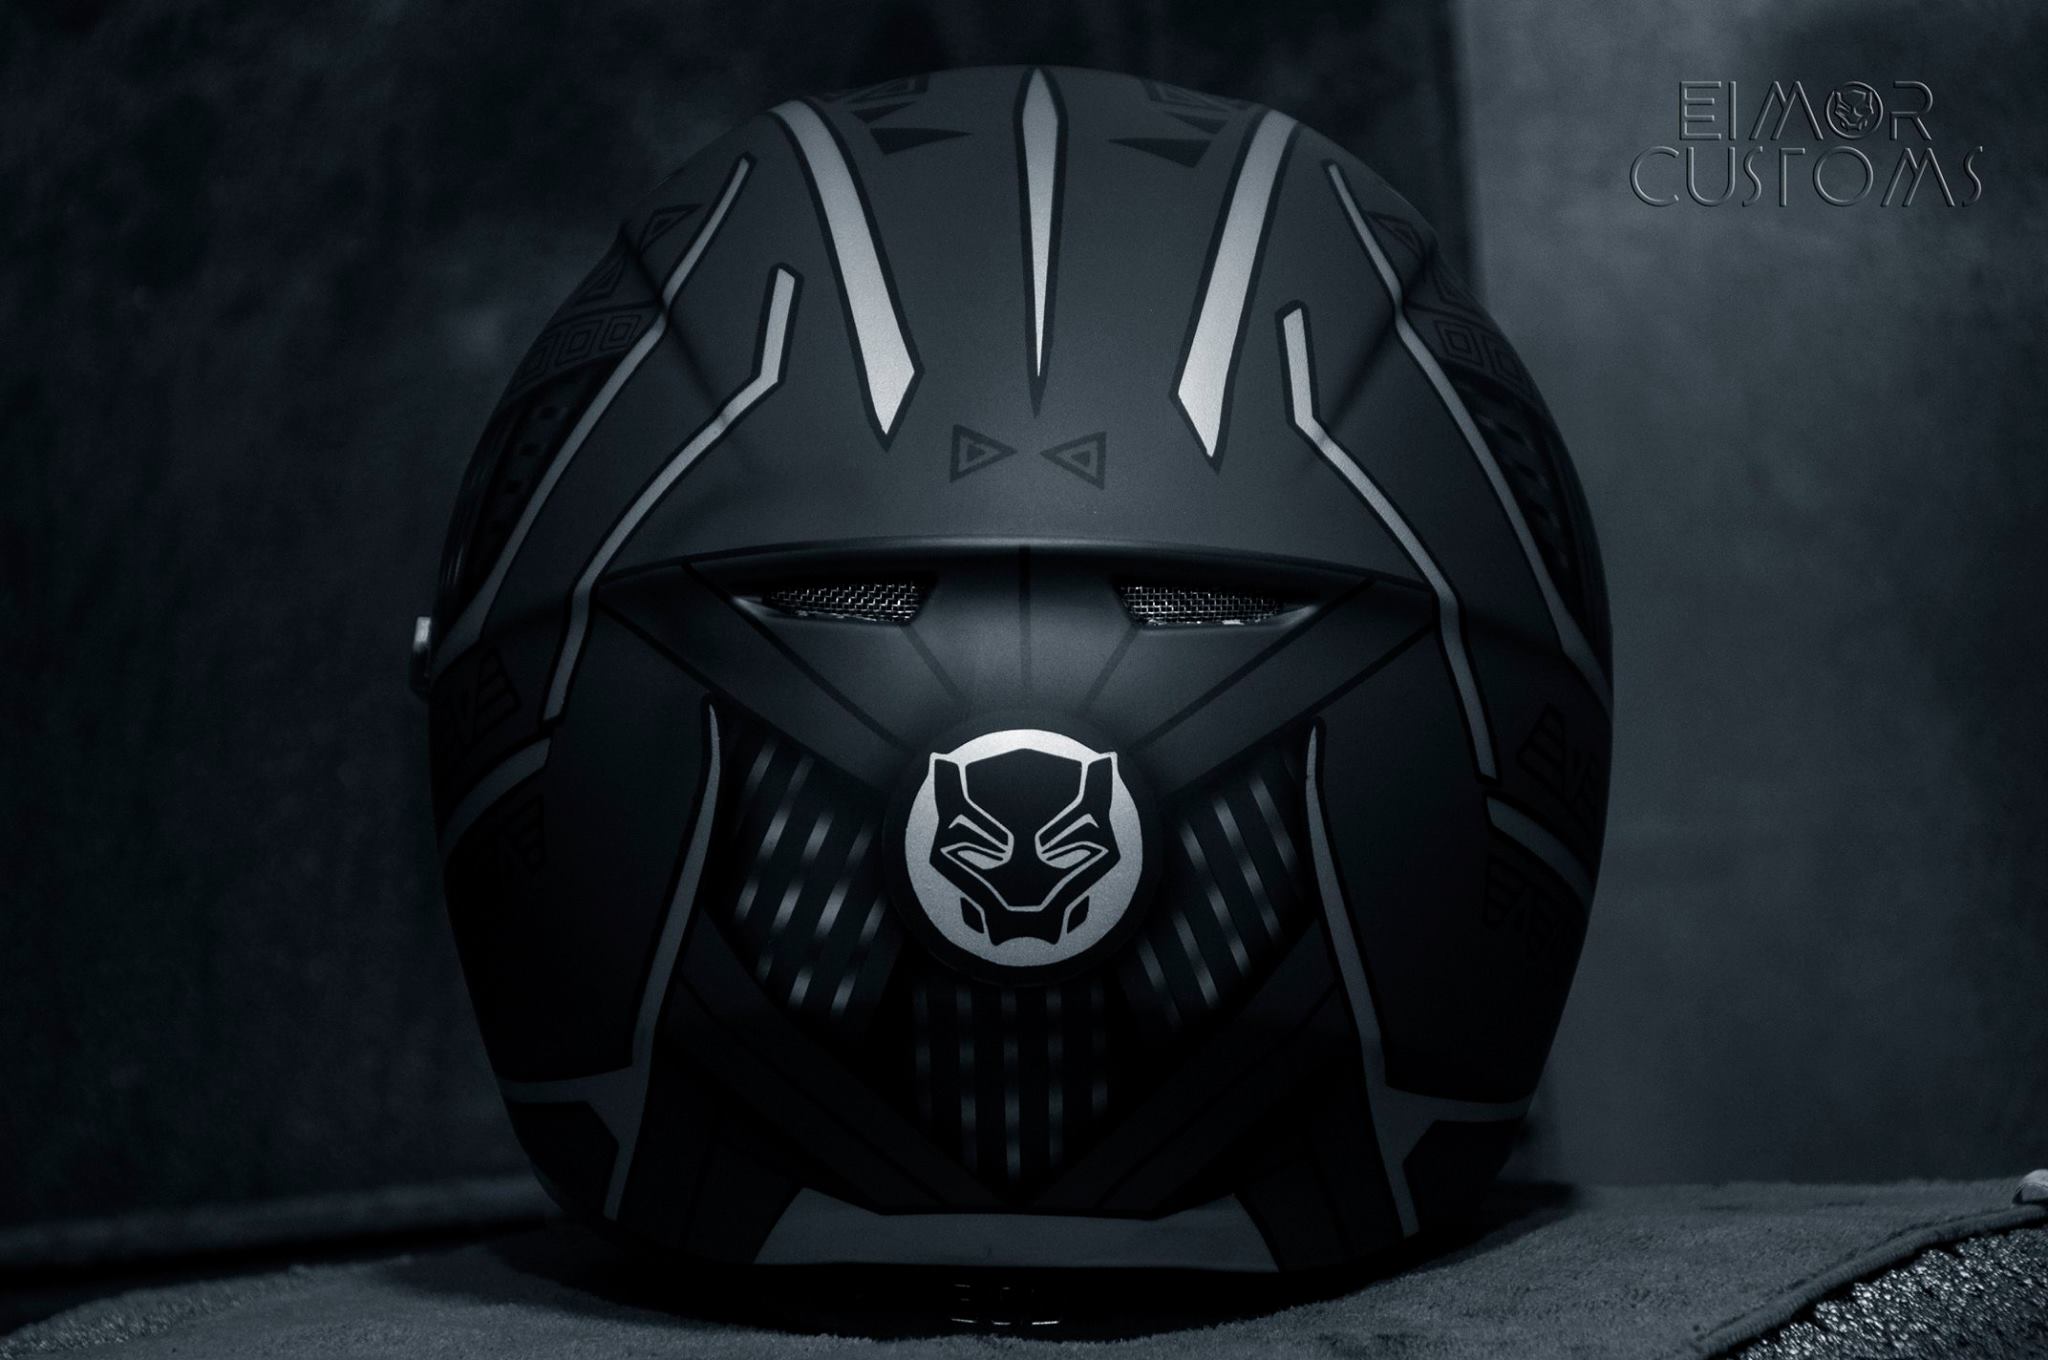 Top 10 Helmets by EIMOR - Black Panther, Breathe, The Lady Rider, Phantom, Captain America & More! - top